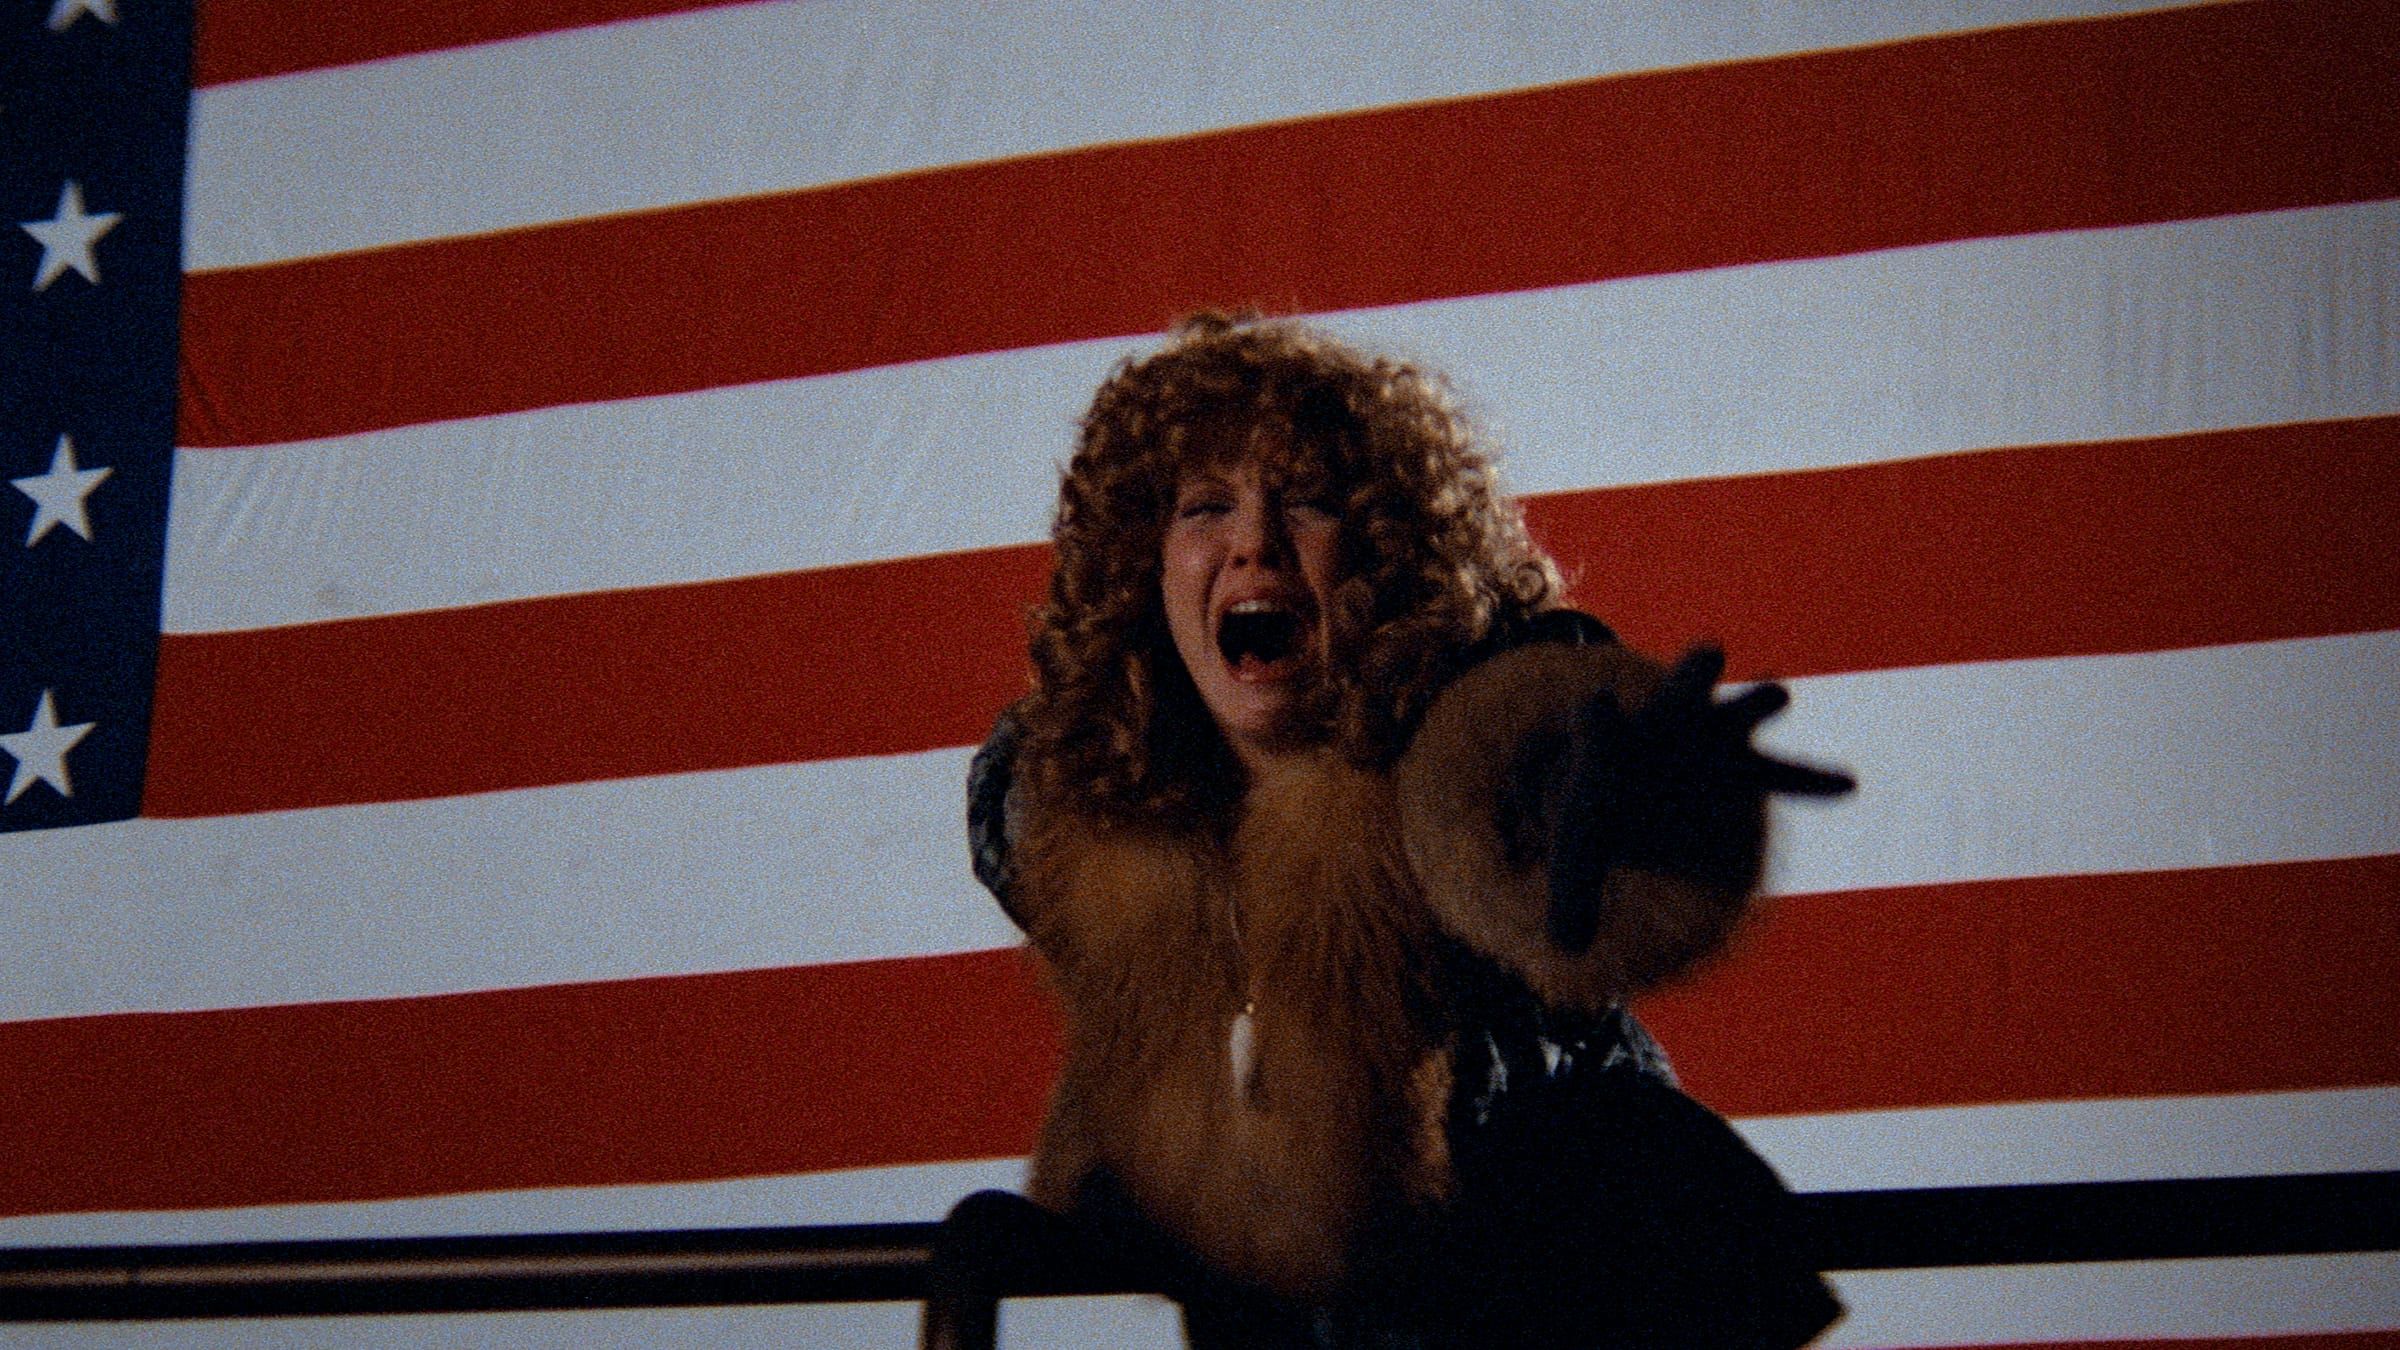 Nany Allen screaming for her life in Brian de Palma's 'Blow Out'